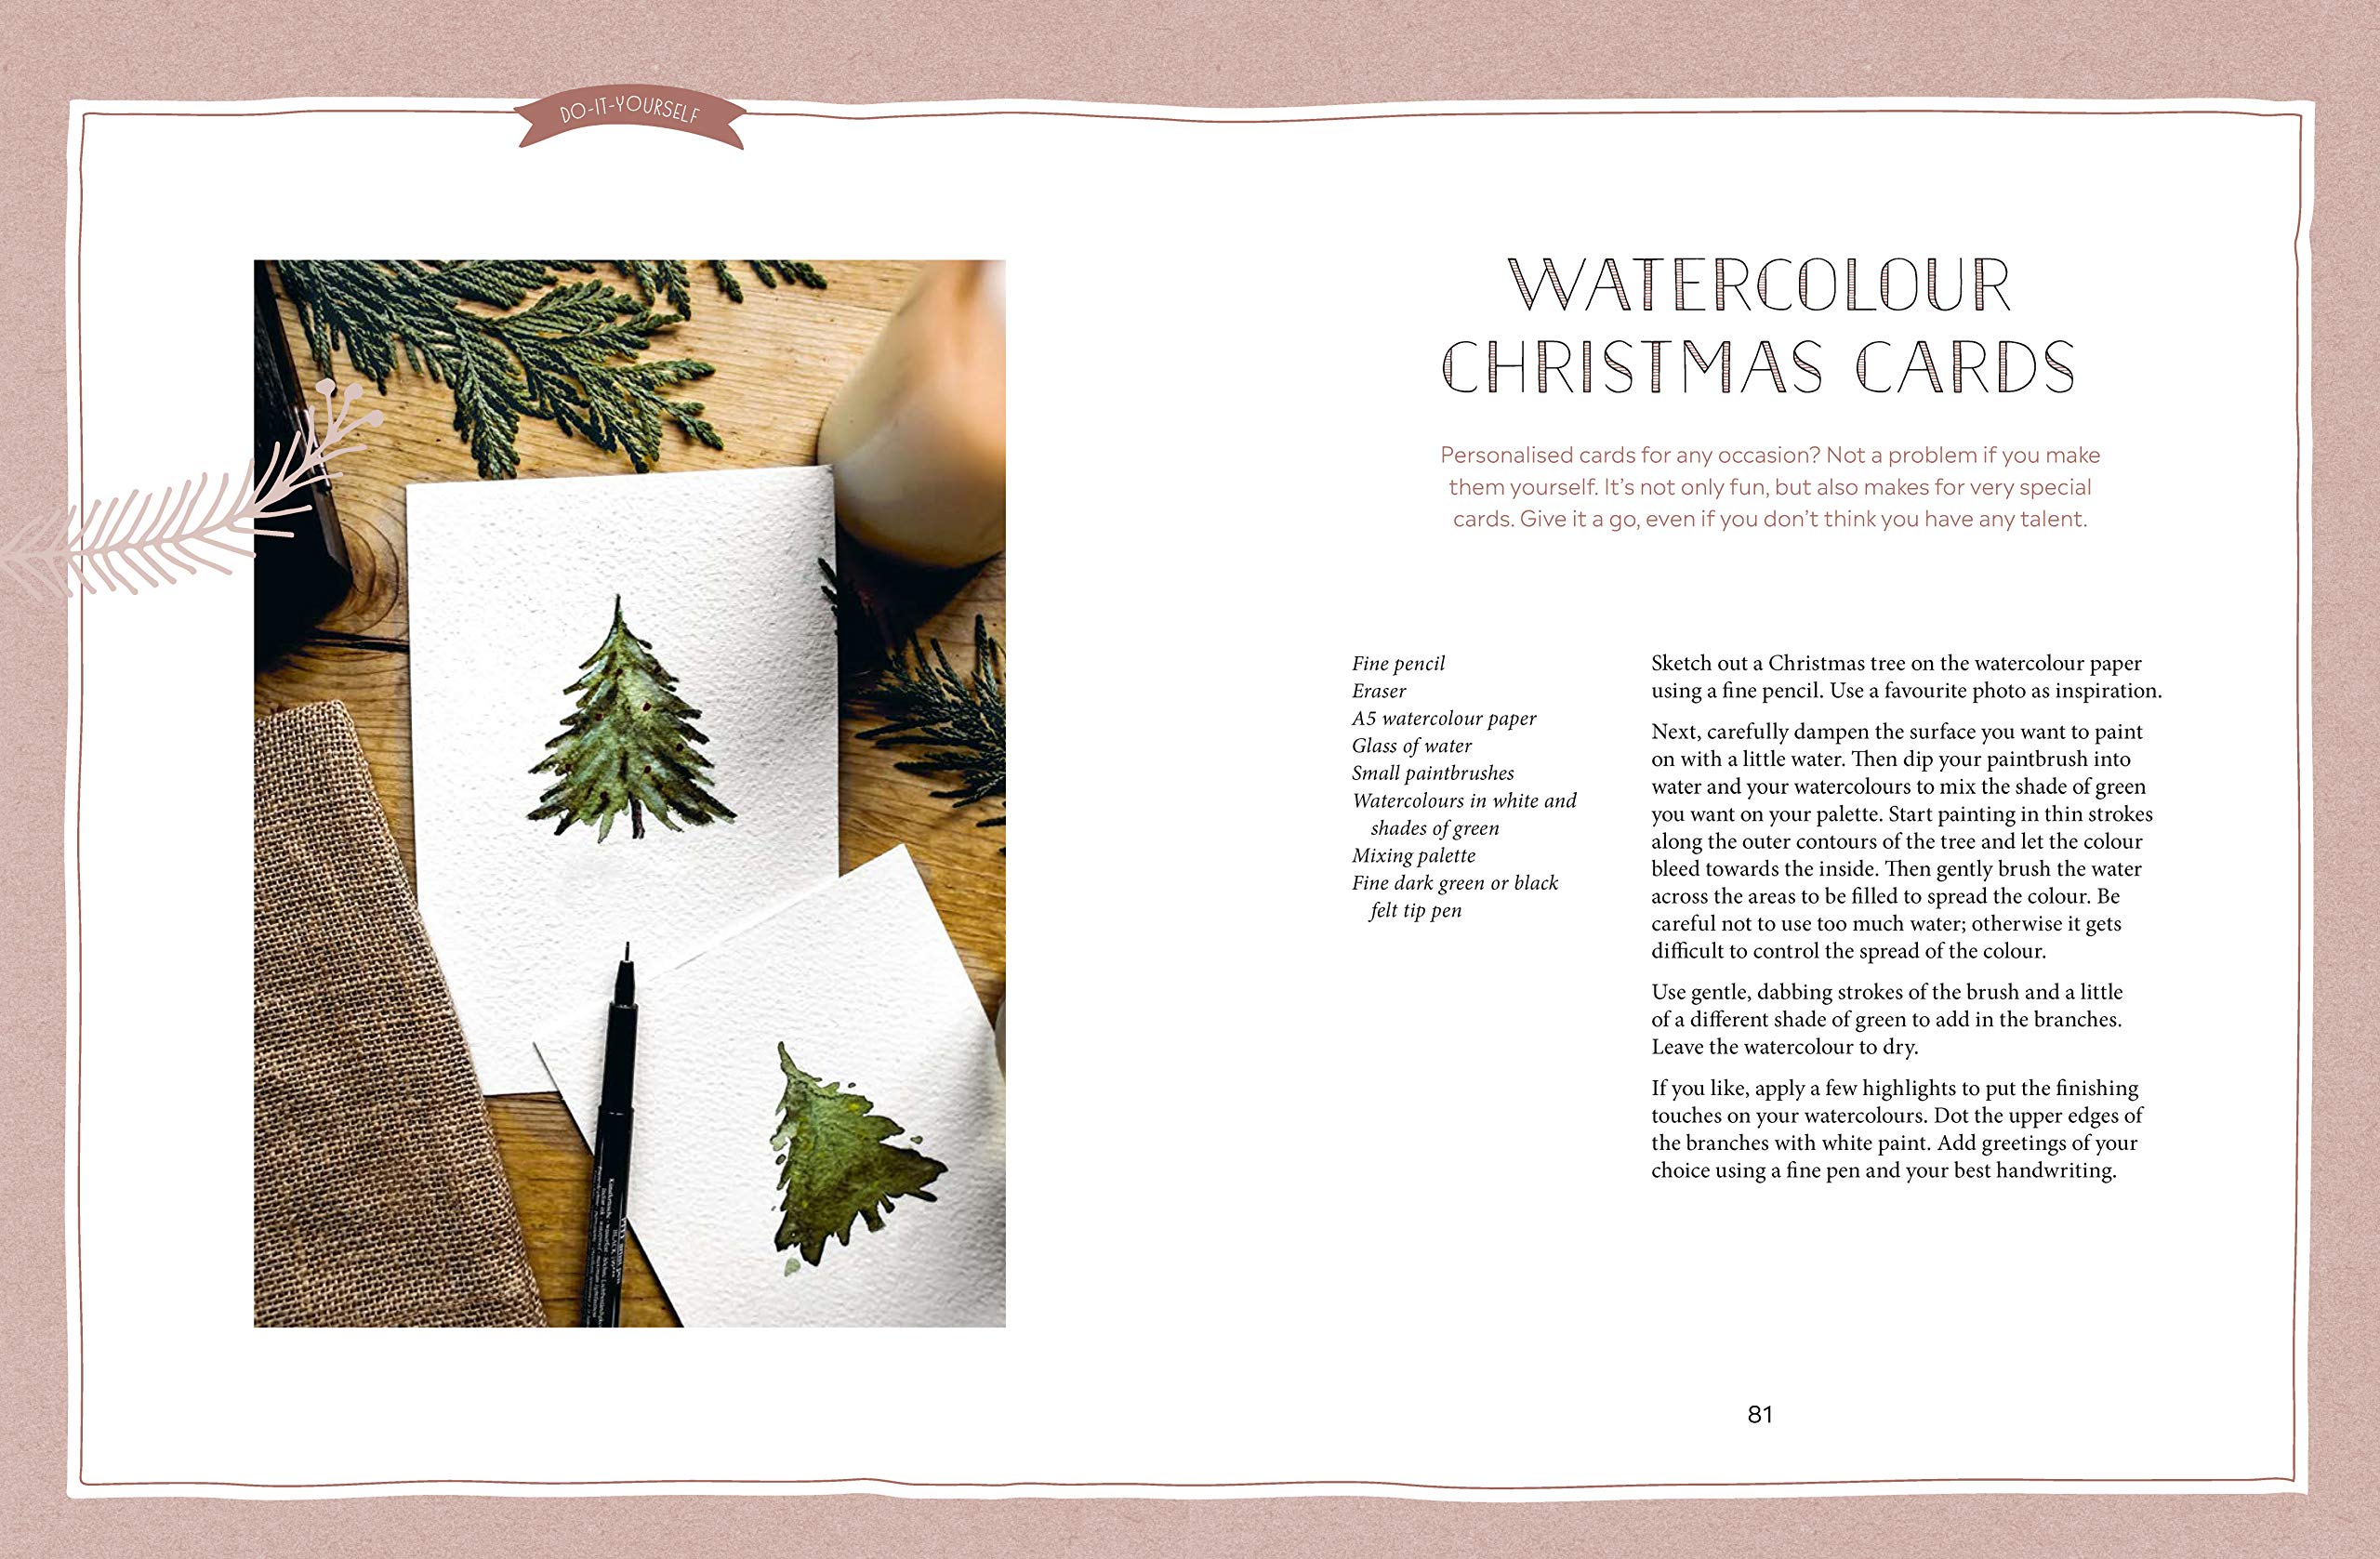 Watercolour Christmas Cards - Advent Recipes and Crafts